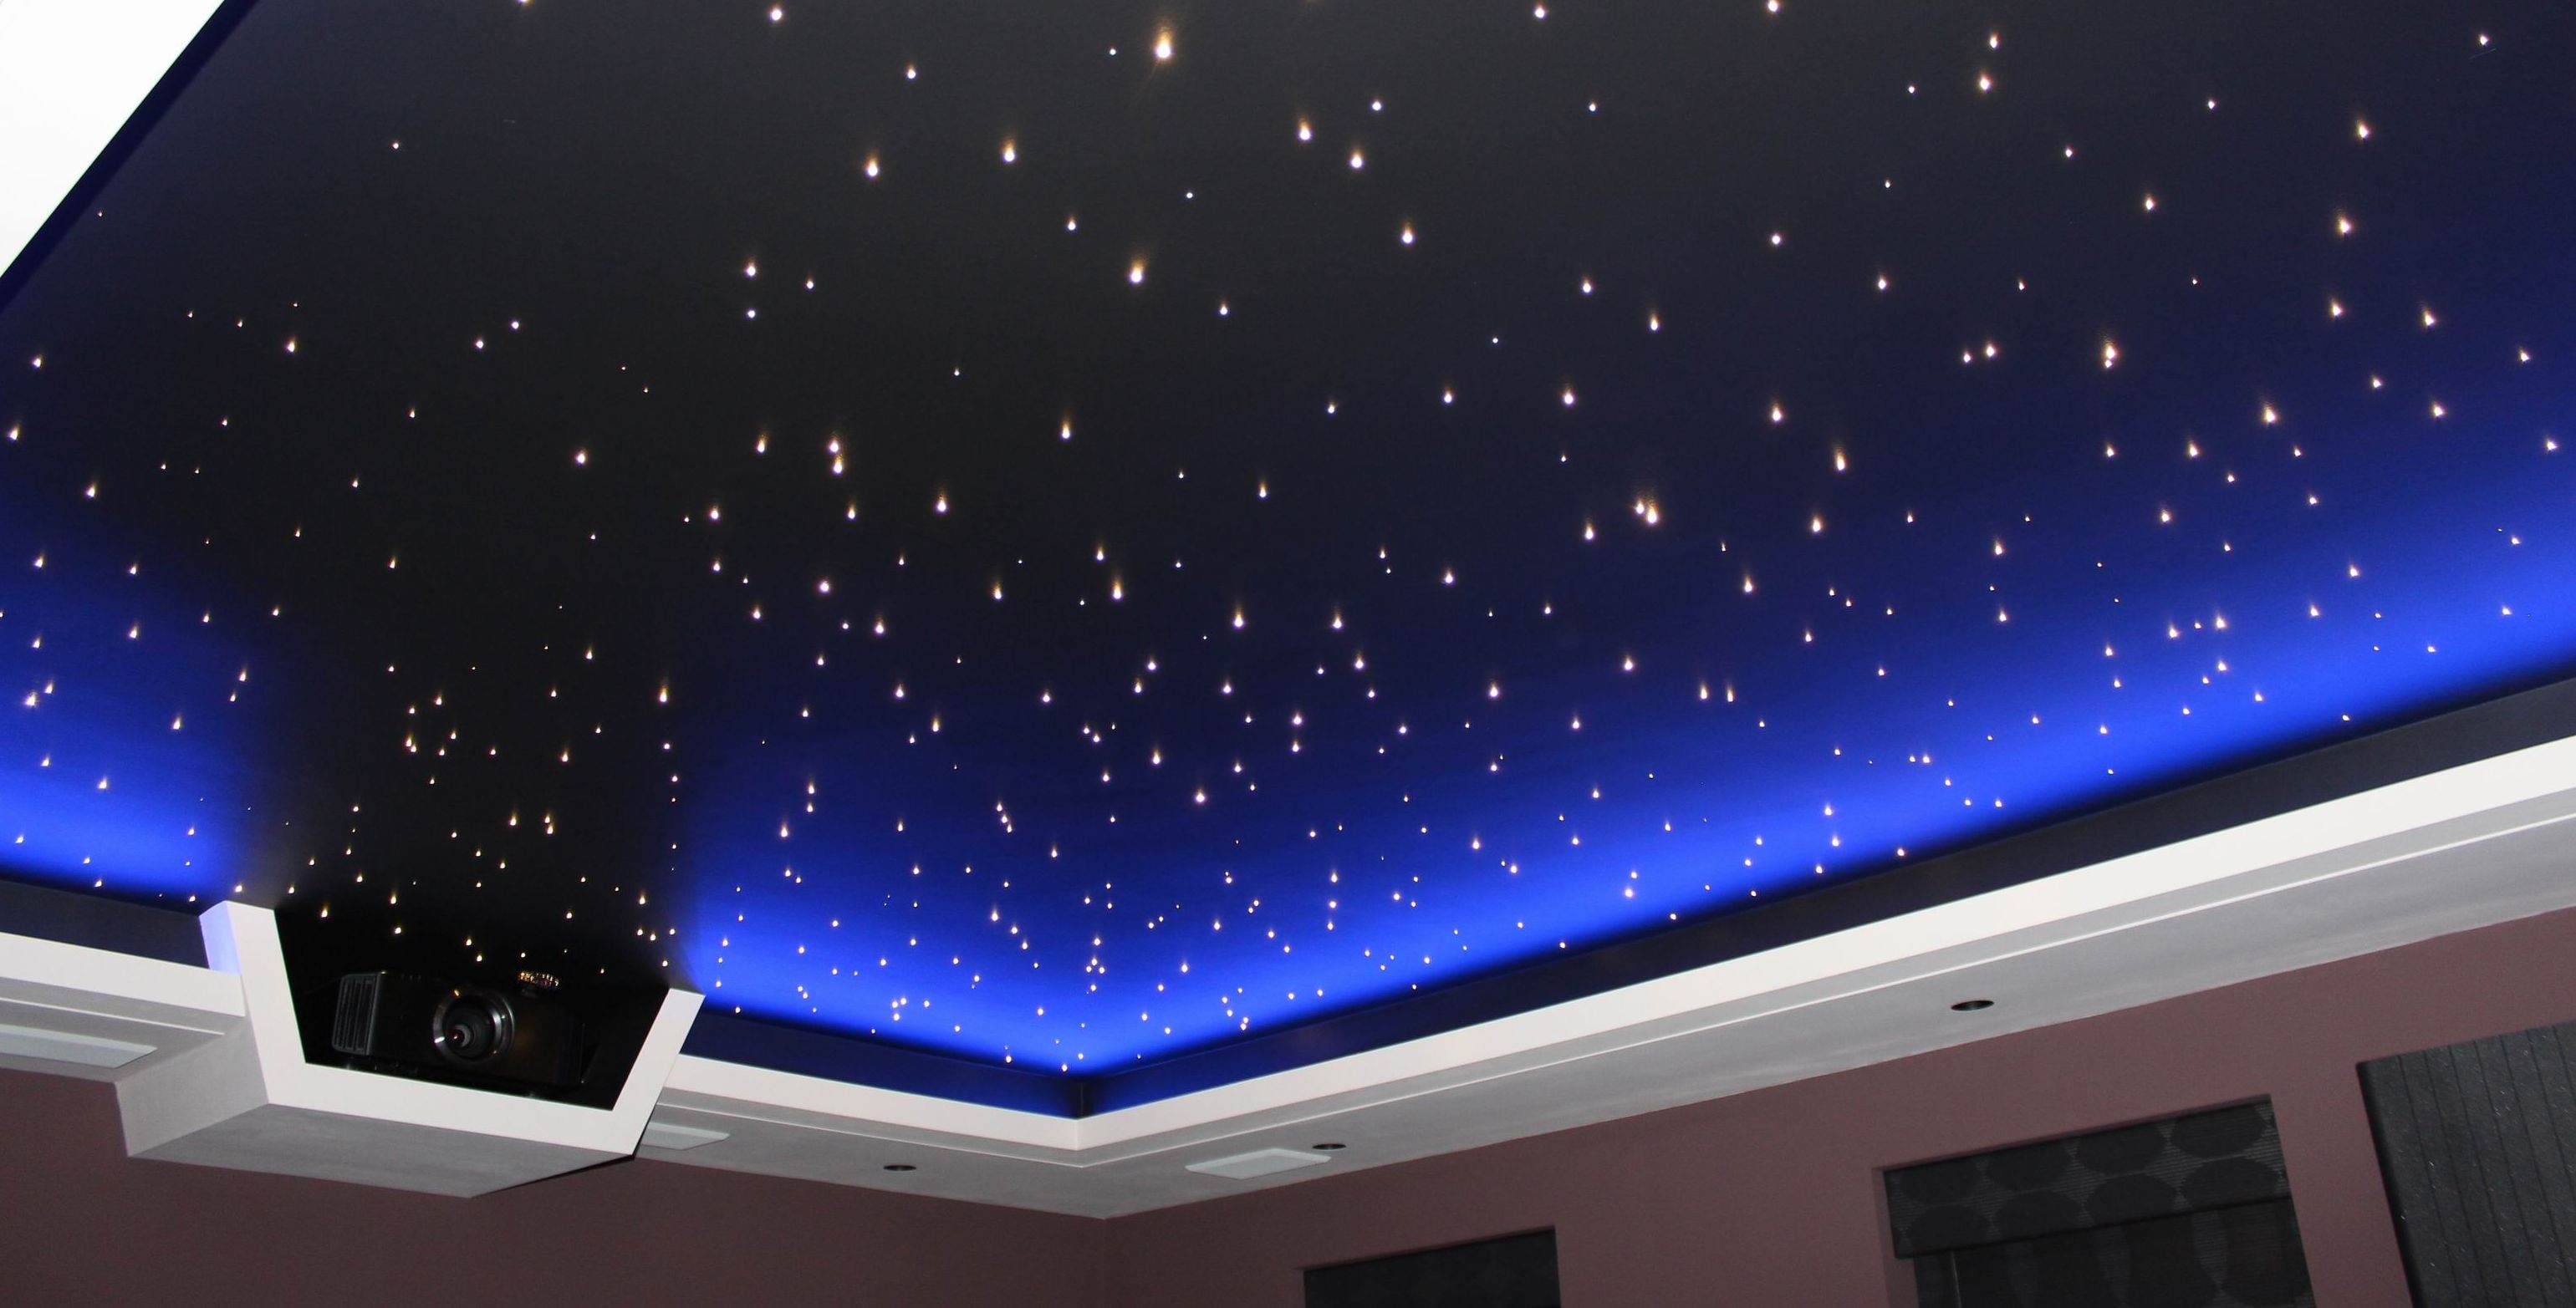 Permalink to Light That Shines Stars On Ceiling